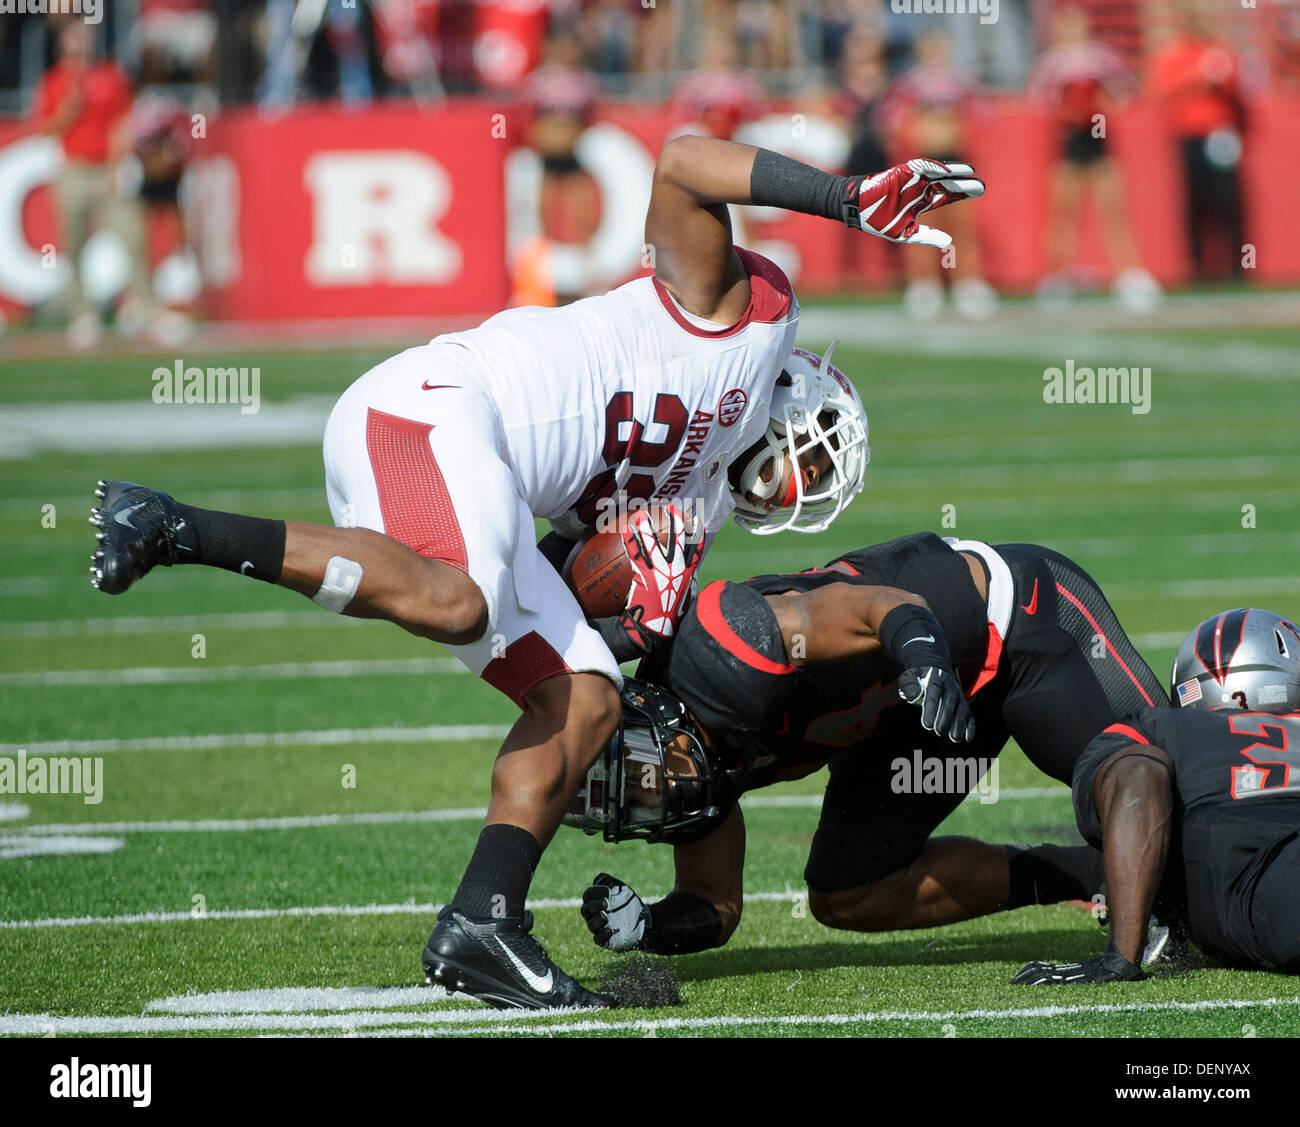 Piscataway, New Jersey, USA. 21st Sep, 2013. September 21, 2013: Rutgers Scarlet Knights defensive back Lew Toler (24) hits Arkansas Razorbacks running back Jonathan Williams (32) at the knees during the game between Arkansas Razorbacks and Rutgers Scarlet Knights at Highpoint Solutions Stadium in Piscataway, NJ. Rutgers Scarlet Knights defeated The Arkansas Razorbacks 28-24. Credit:  csm/Alamy Live News Stock Photo